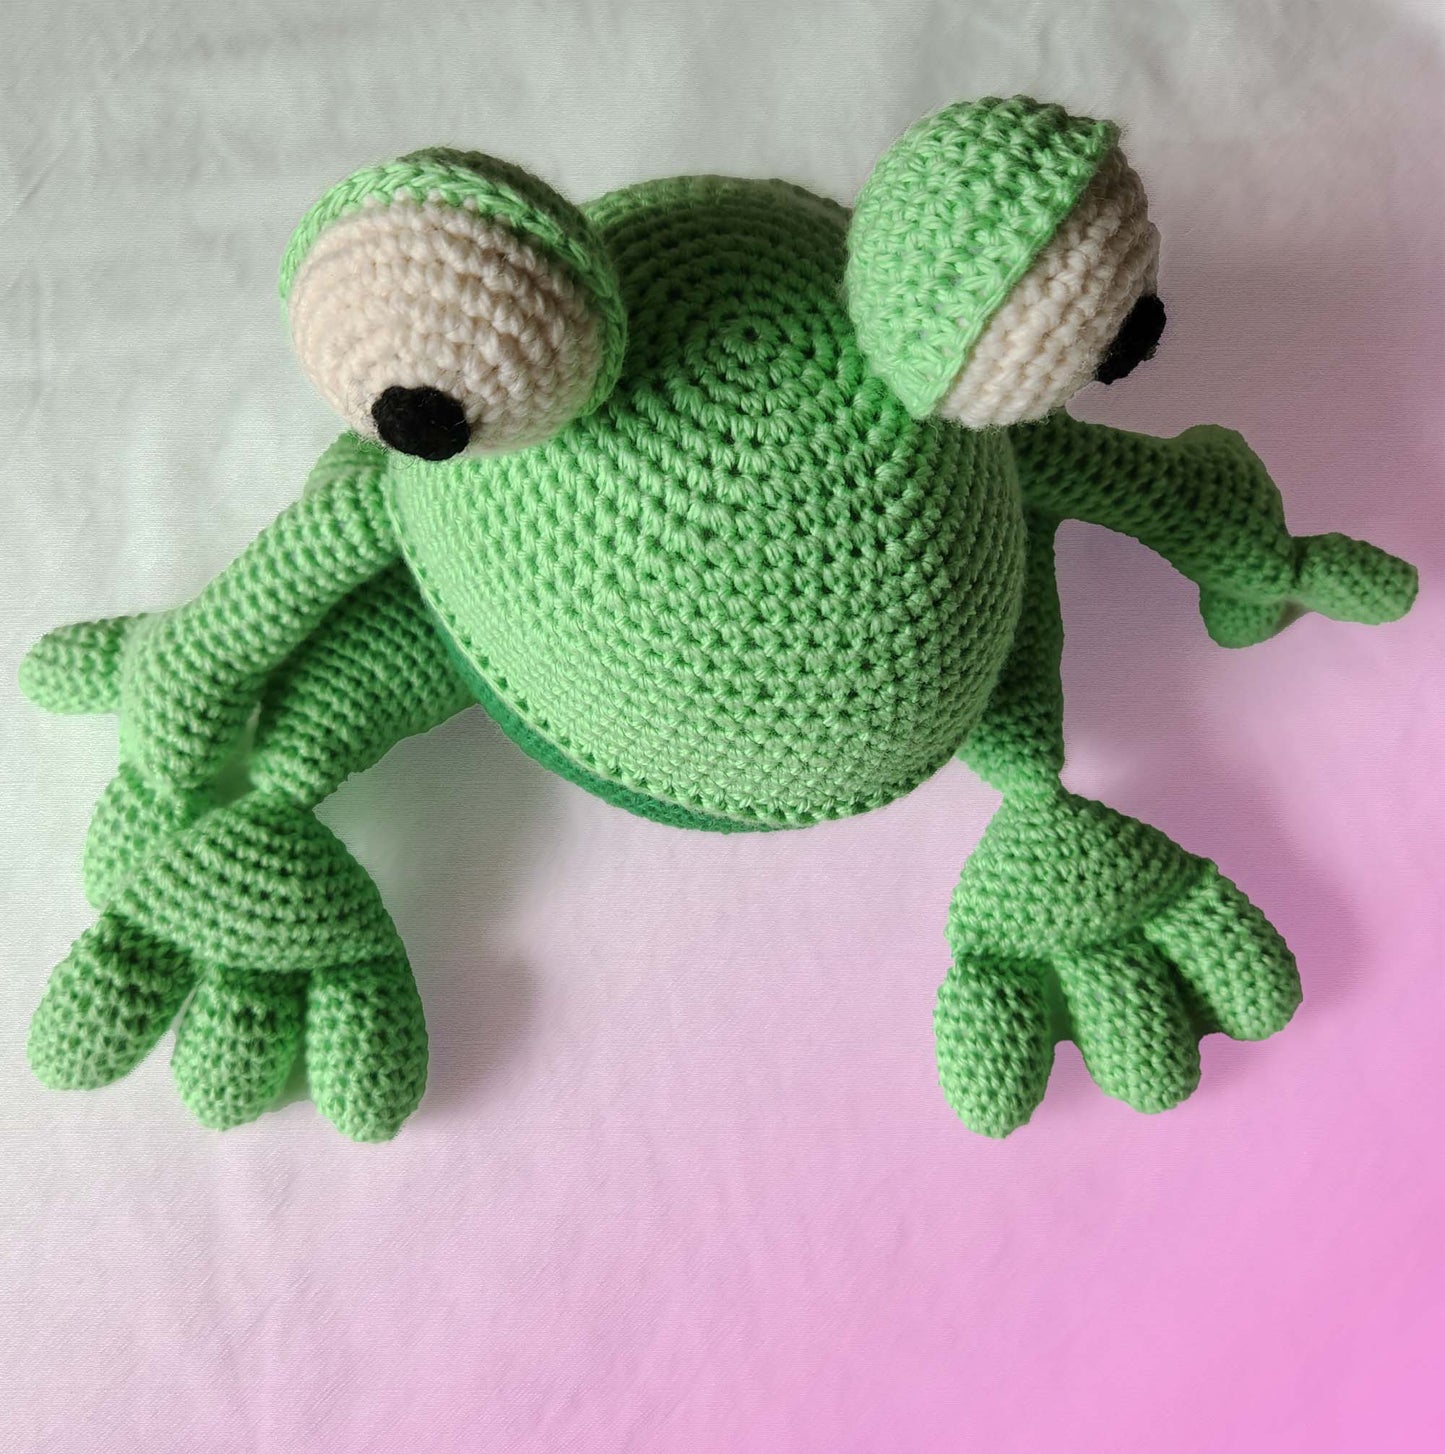 Soft cuddly toy frog in green and green